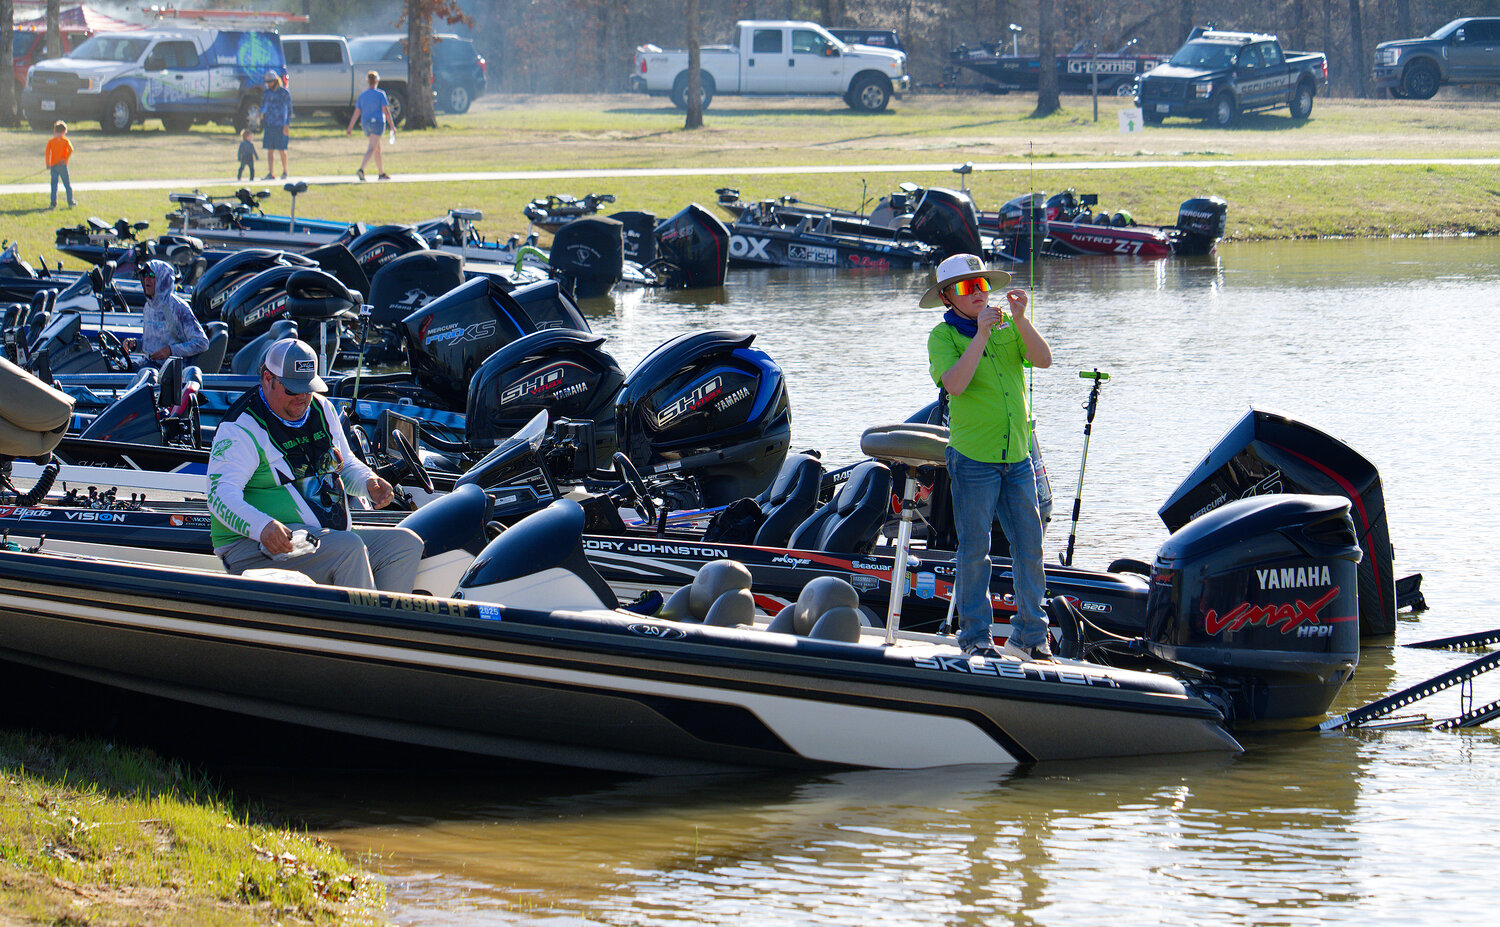 A young angler switches bait on one of the competition bass boats.